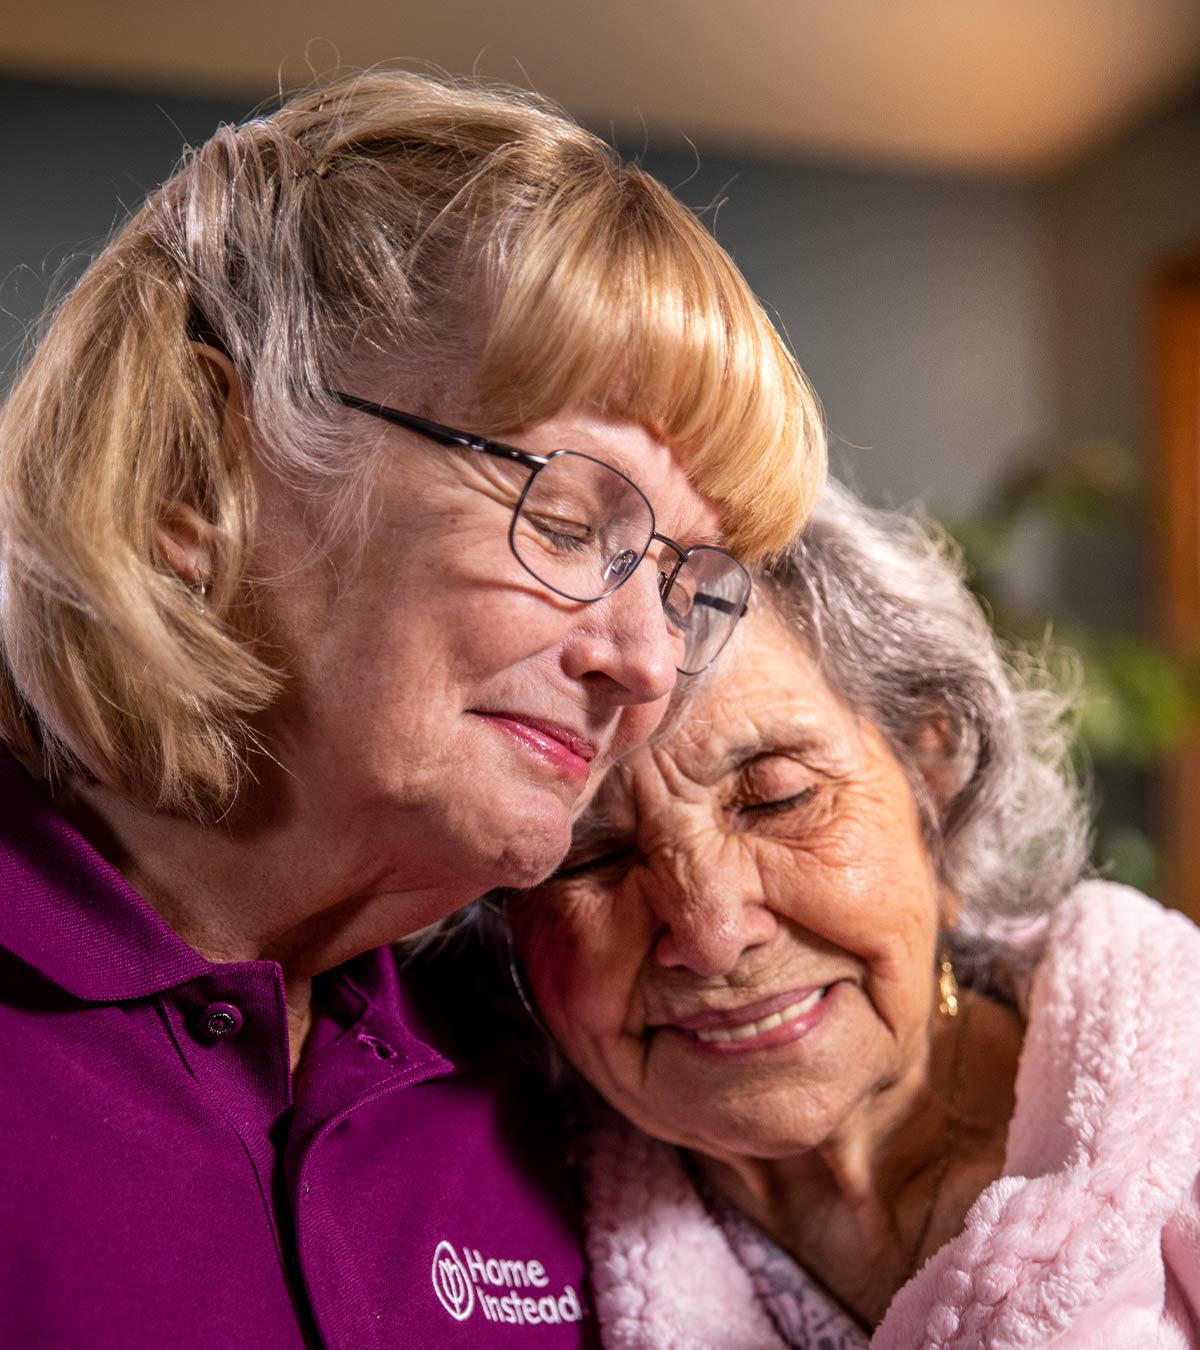 CAREGiver providing in-home senior care services. Home Instead of Bowling Green, KY provides Elder Care to aging adults. 